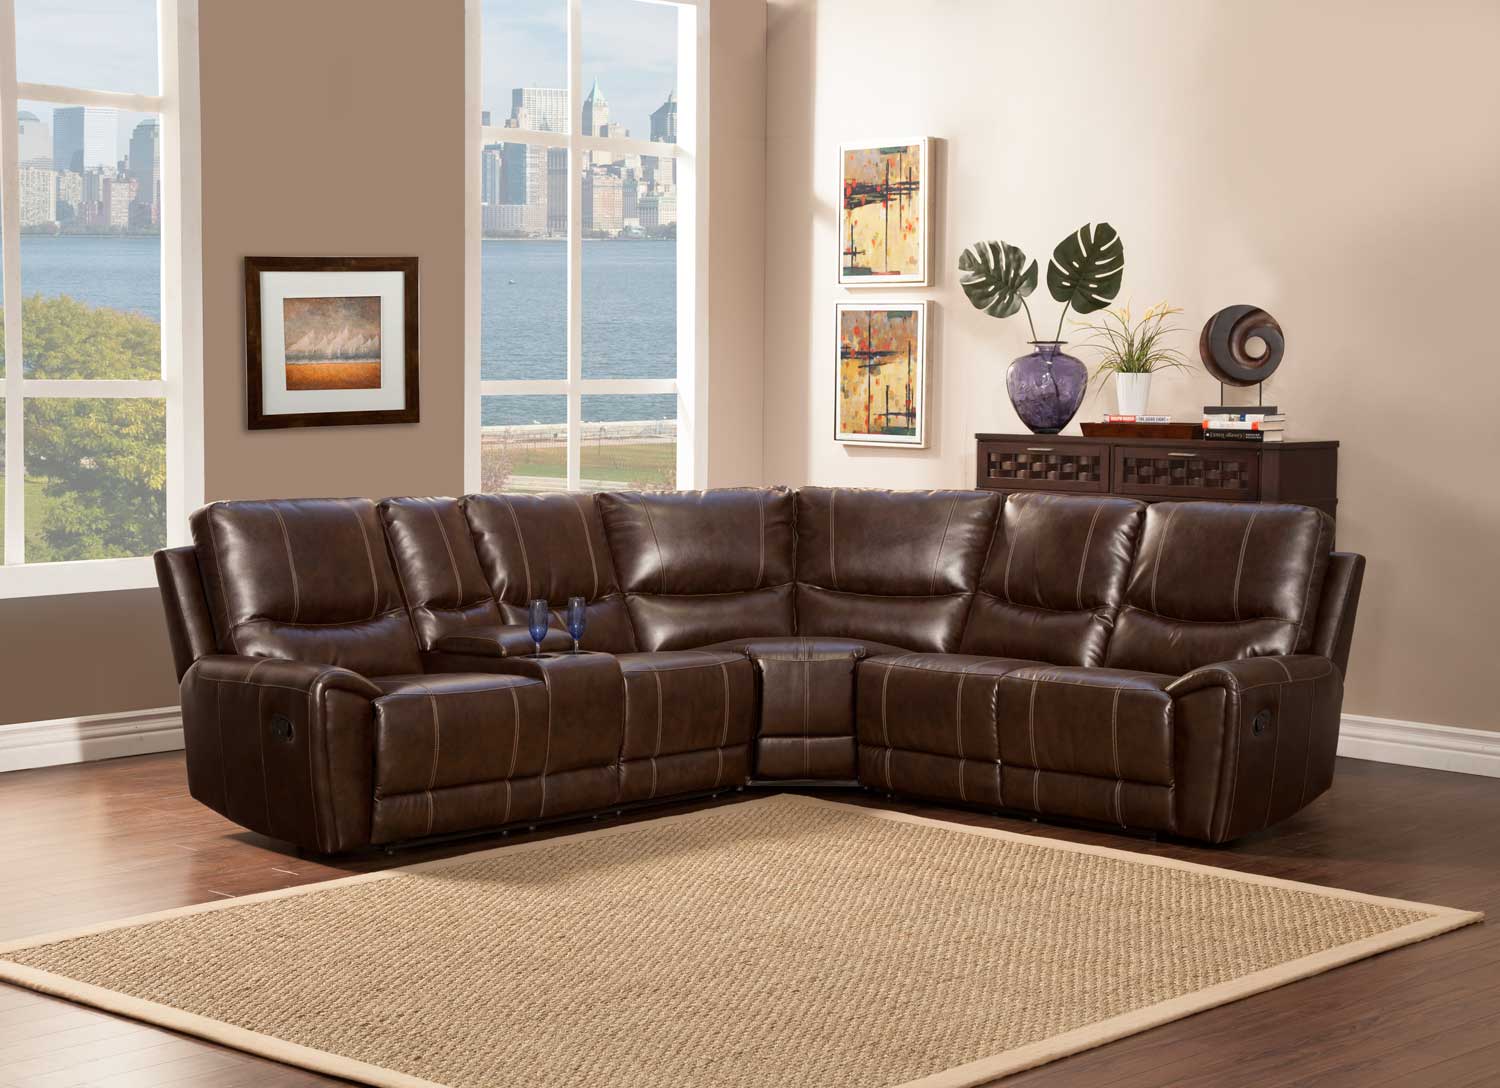 Homelegance Gerald Sectional Sofa - Brown - Bonded Leather Match